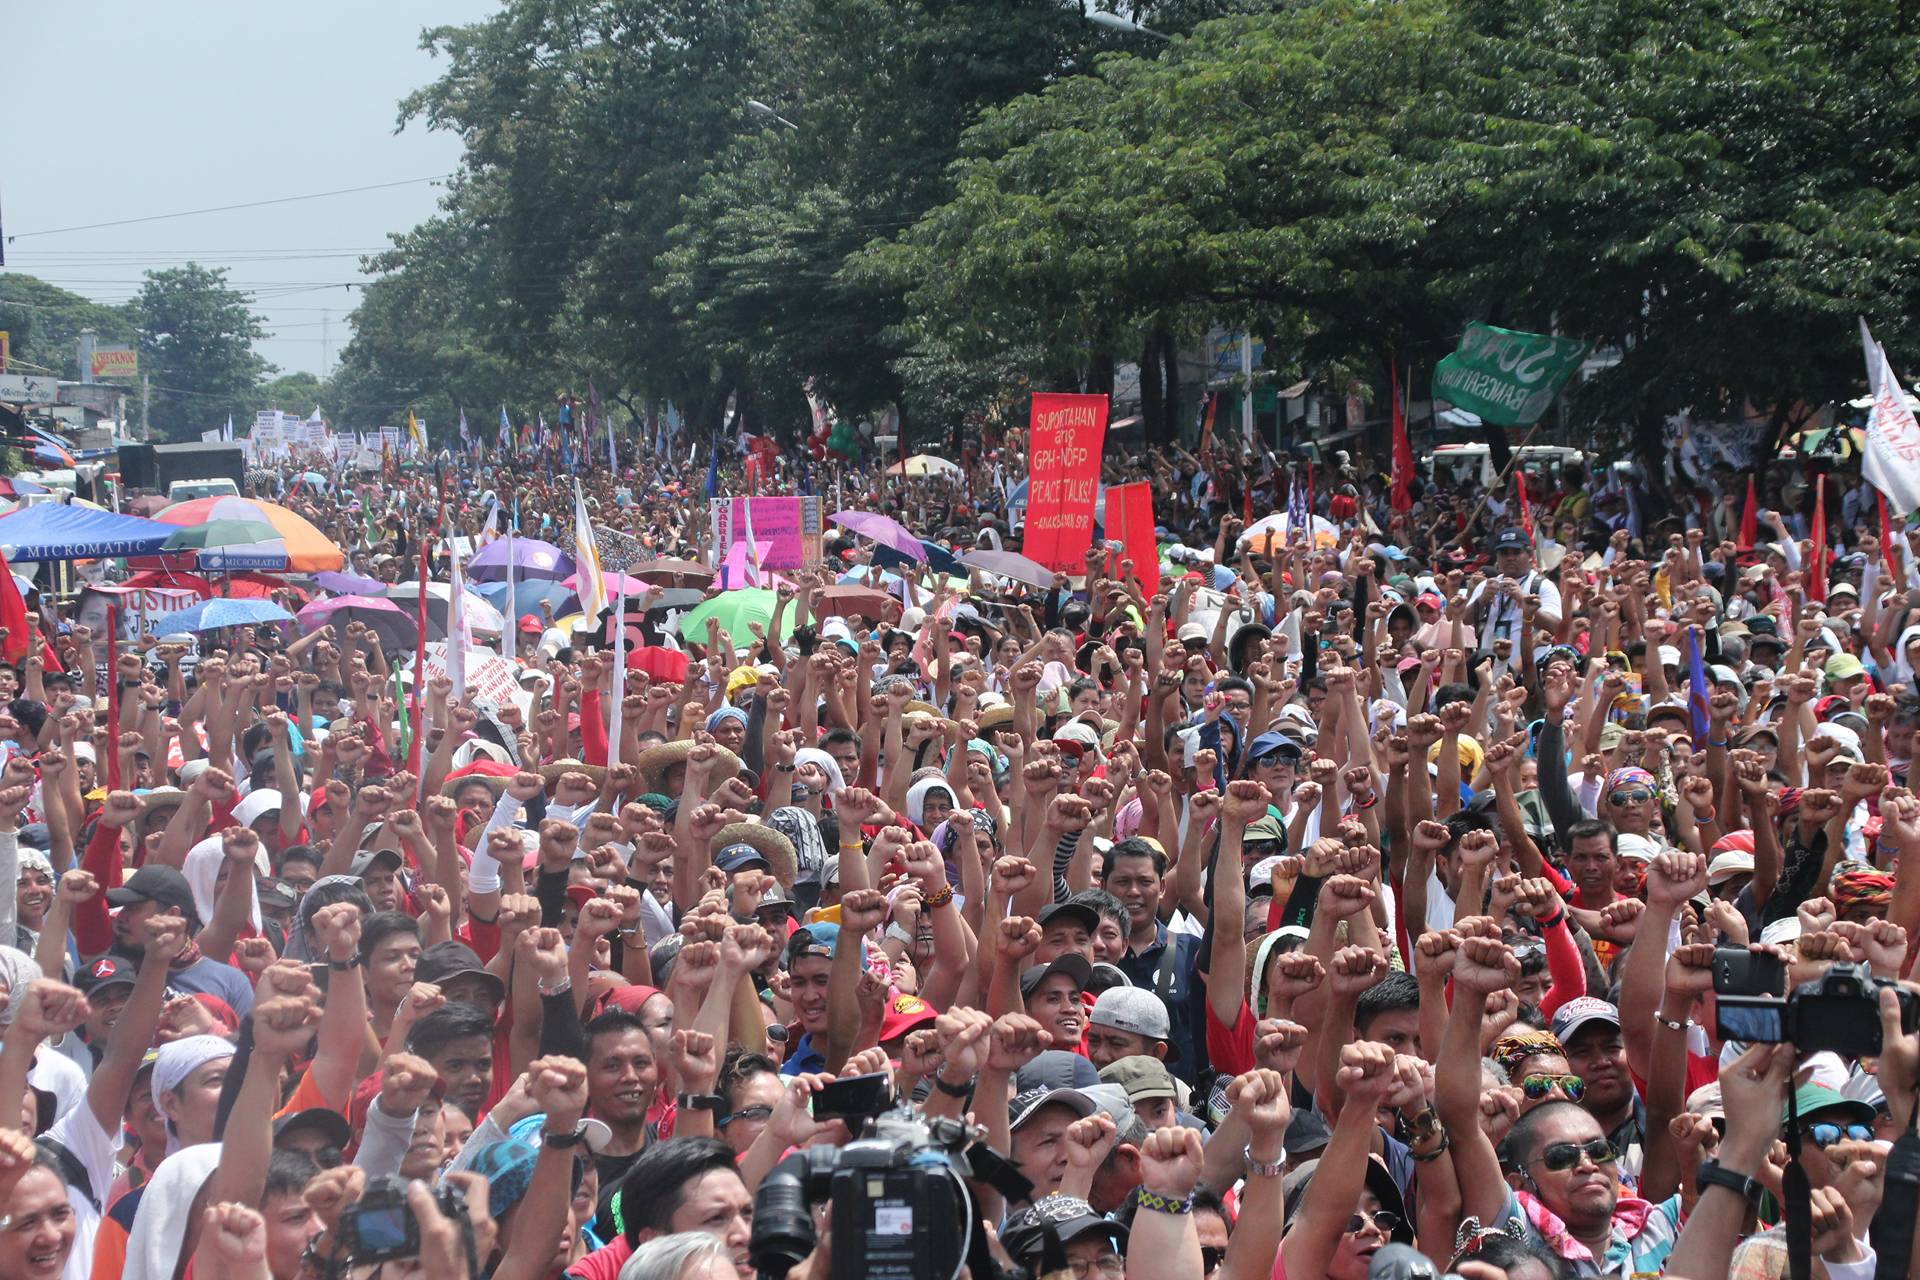 Thousands marched along Commonwealth Avenue in Quezon City for the 'People's State of the Nation Address'. The march ended in the Batasan road where the rallyists held their program some 300 meters away from the Batasan Complex where President Rodrigo Duterte delivered his first SONA. (Earl O. Condeza/davaotoday.com)